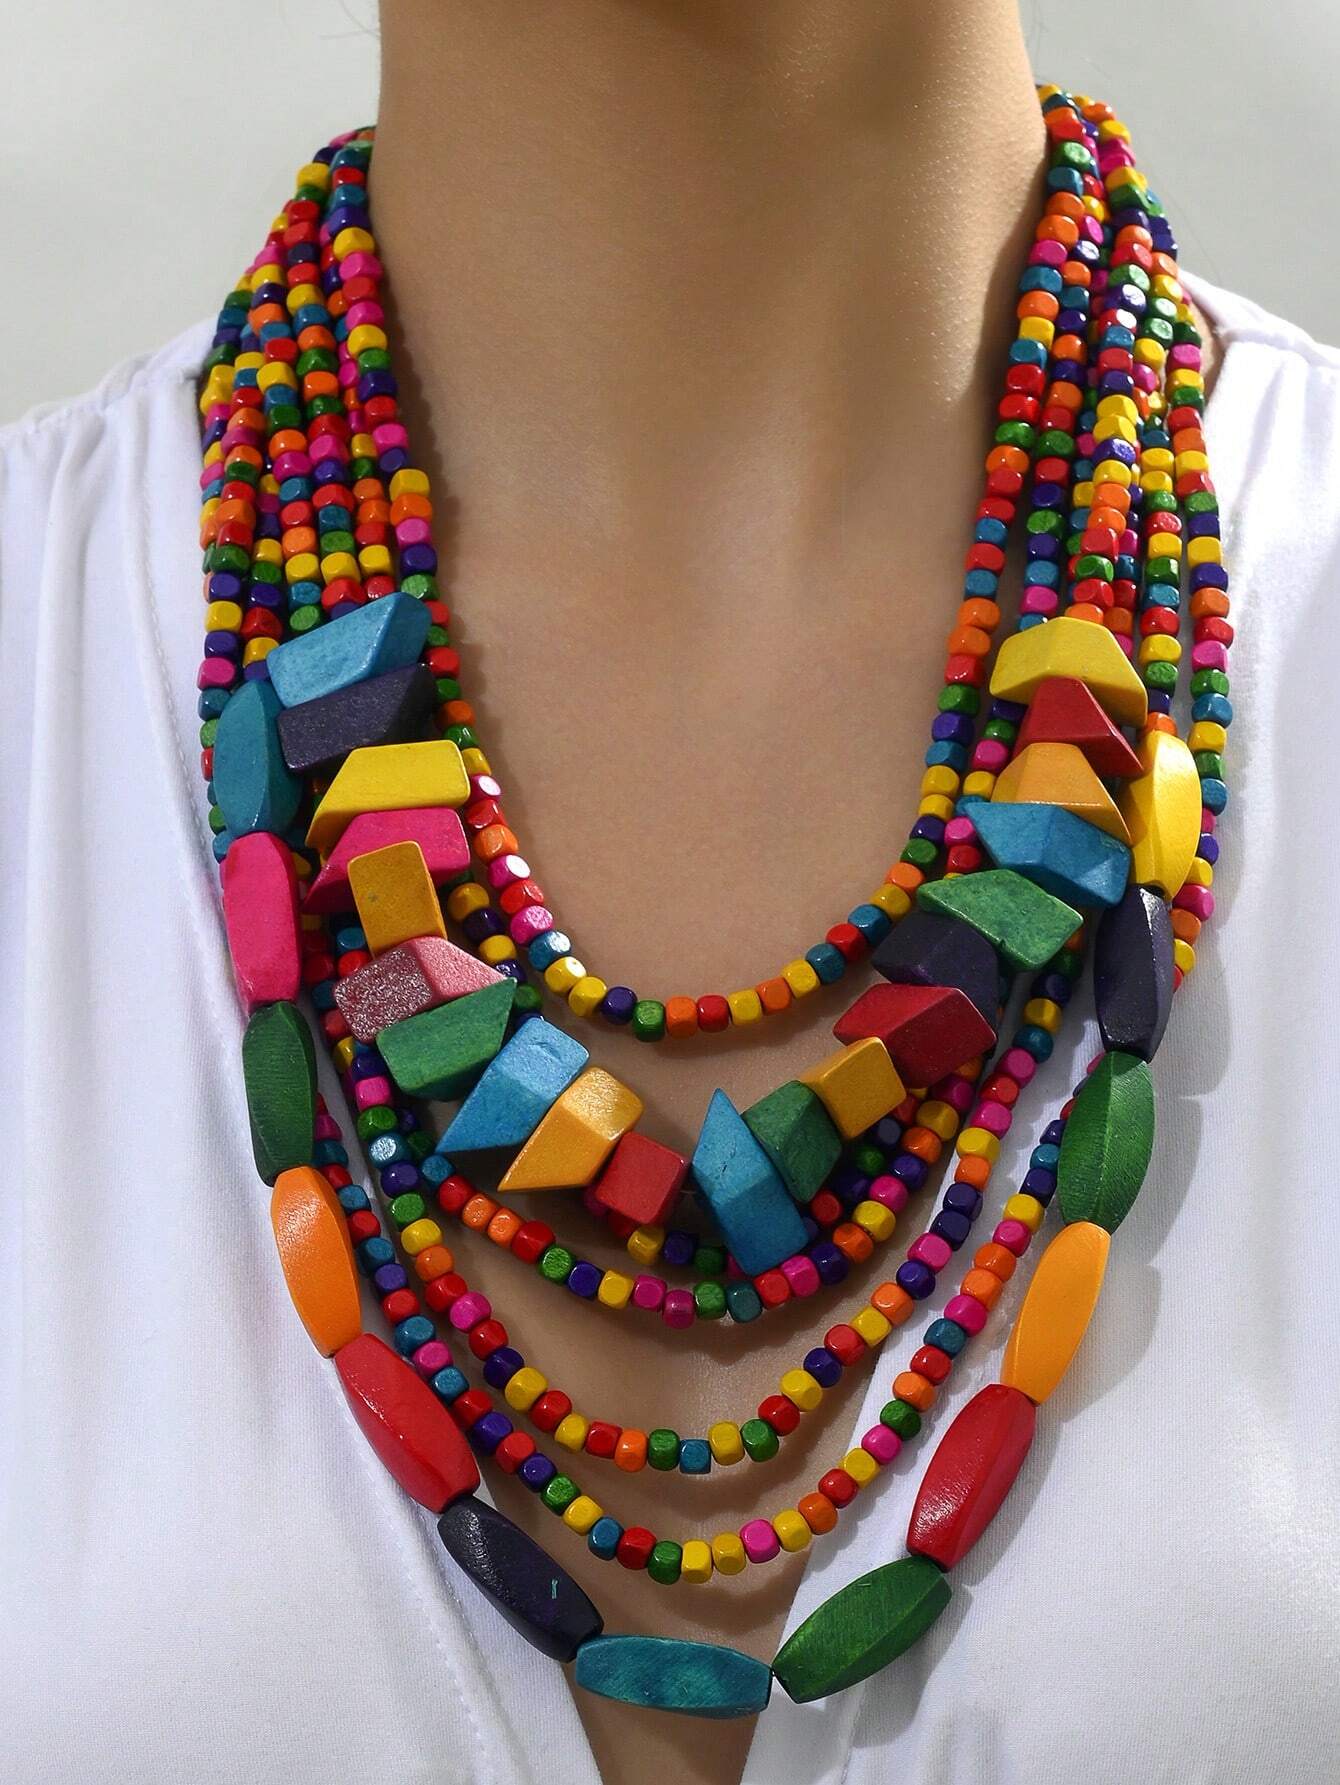 1pc Vintage Bohemian Style Colorful Wood Layered Necklaces Elegant Casual Jewelry For Women&Teen Girls